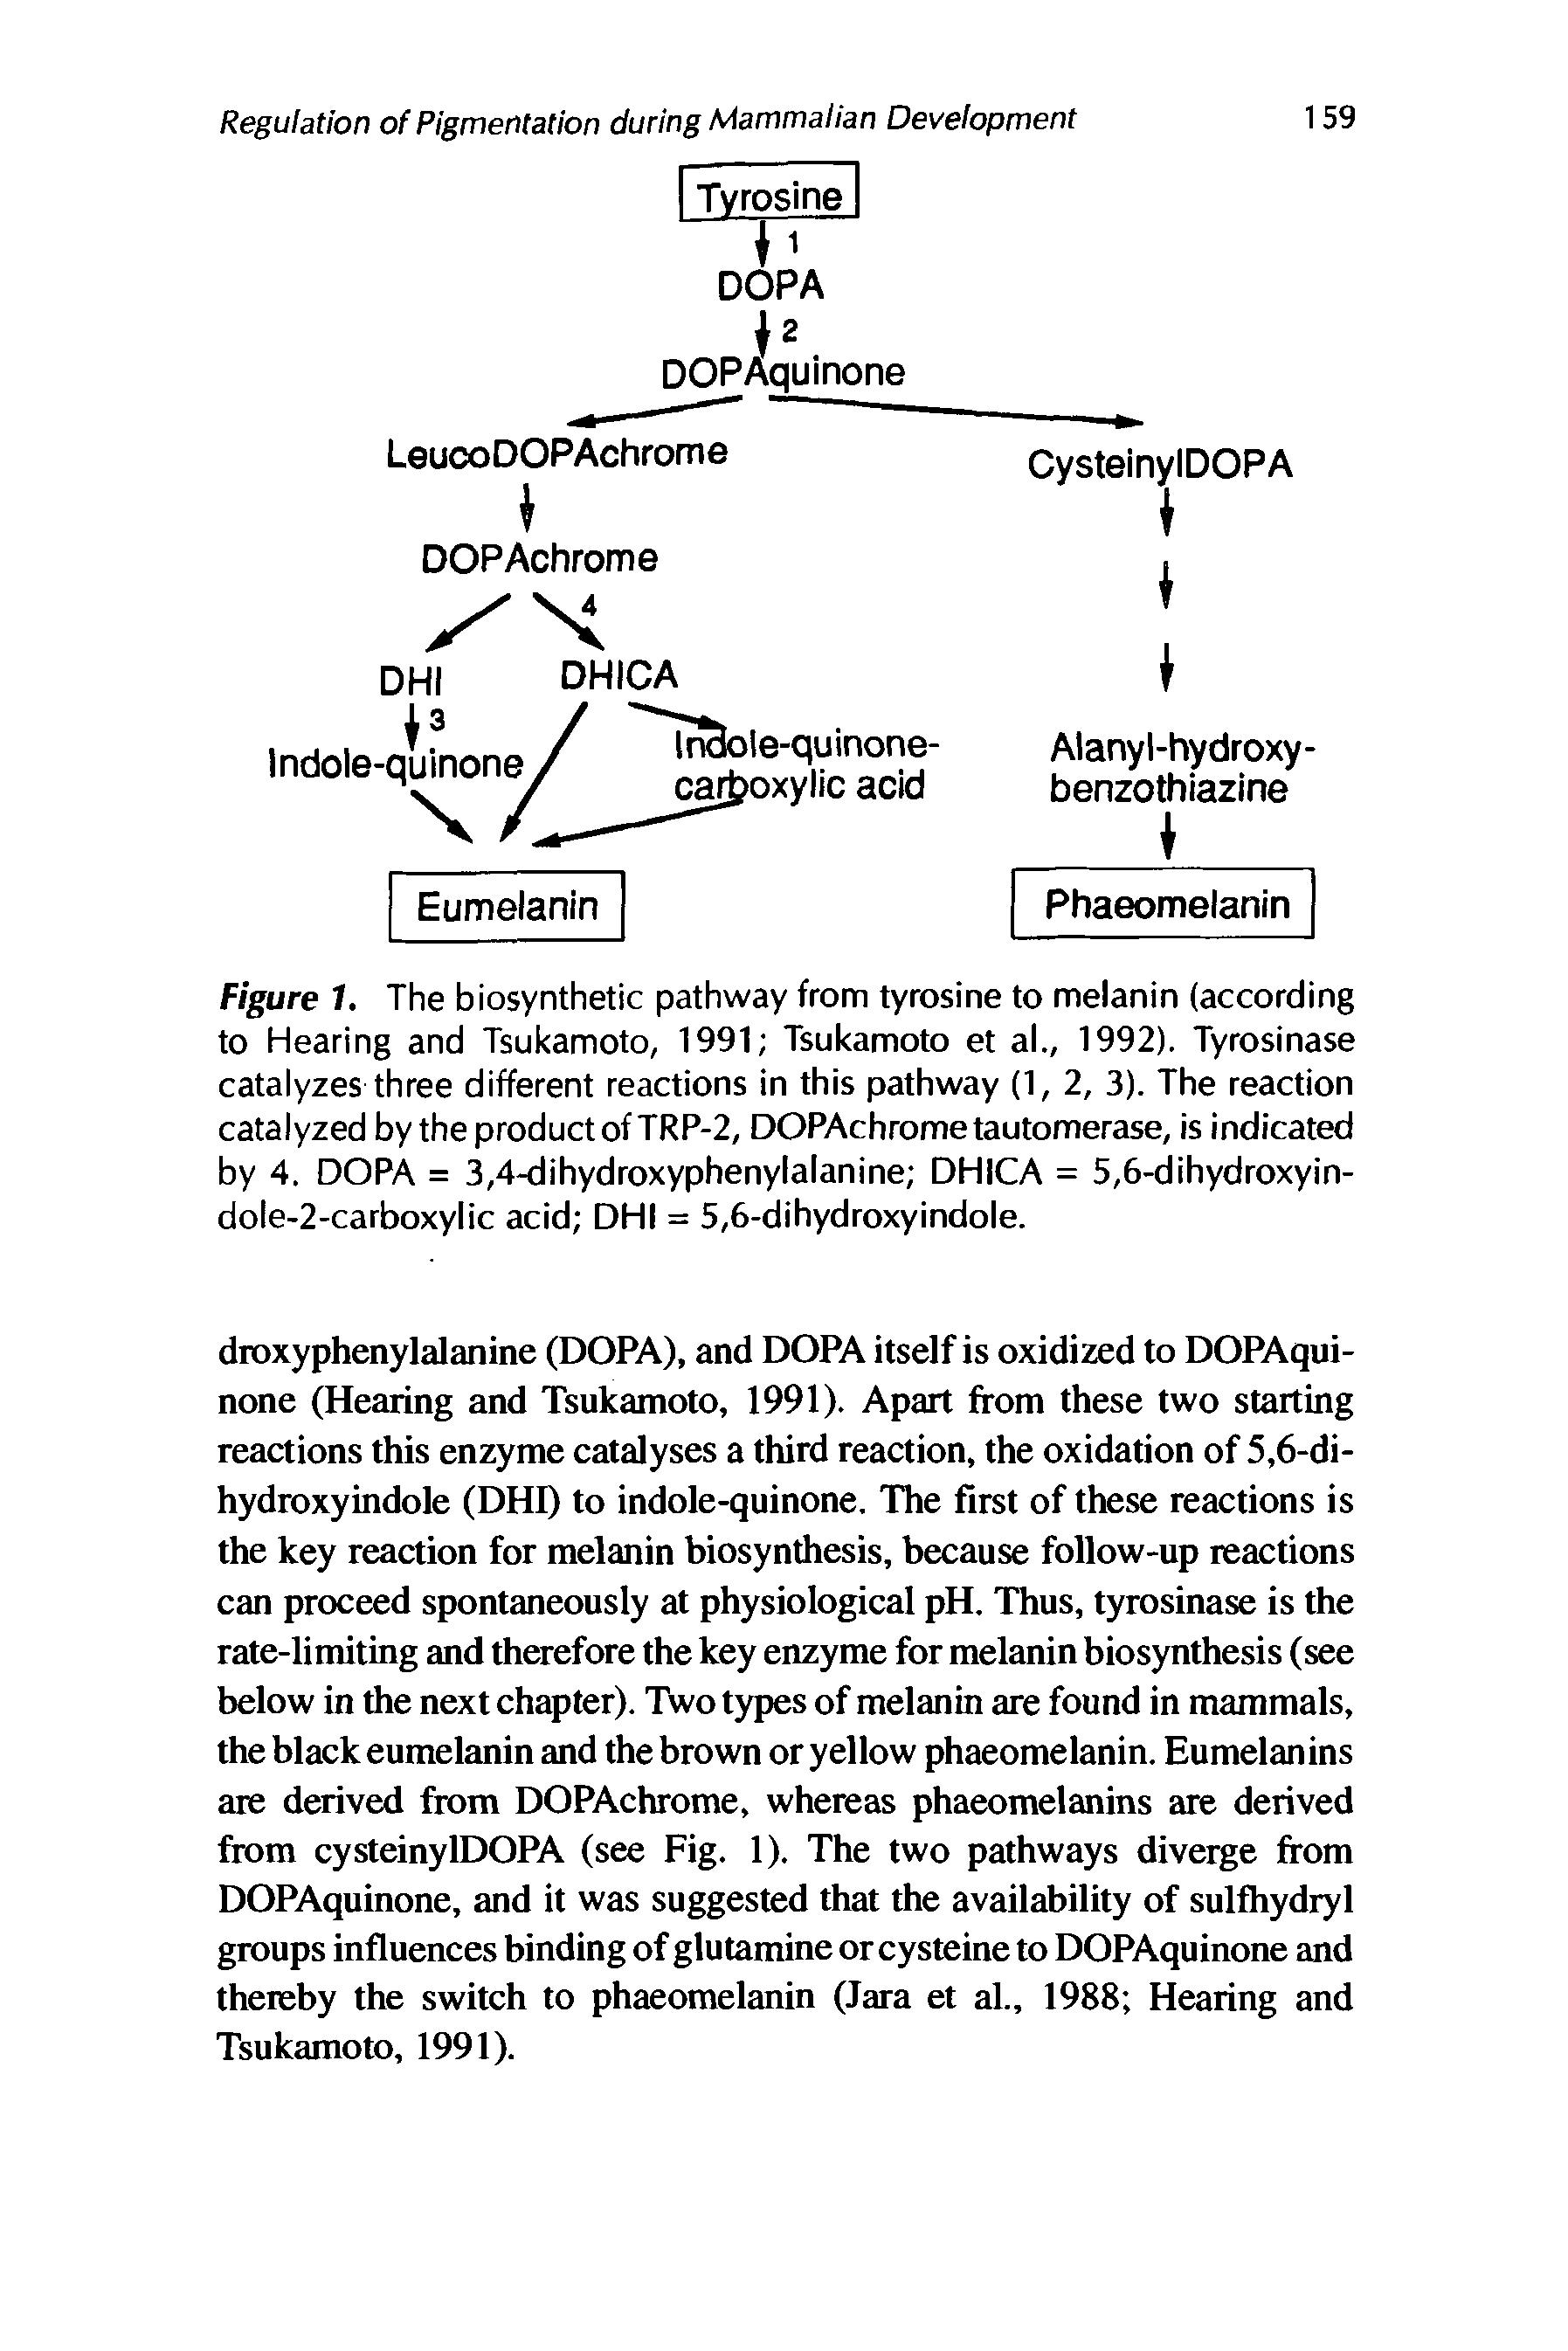 Figure 1. The biosynthetic pathway from tyrosine to melanin (according to Hearing and Tsukamoto, 1991 Tsukamoto et al., 1992). Tyrosinase catalyzes three different reactions in this pathway (1, 2, 3). The reaction catalyzed by the product of TRP-2, DOPAchrome tautomerase, is indicated by 4. DOPA = 3,4-dihydroxyphenylalanine DHICA = 5,6-dihydroxyin-dole-2-carboxylic acid DHI = 5,6-dihydroxyindole.